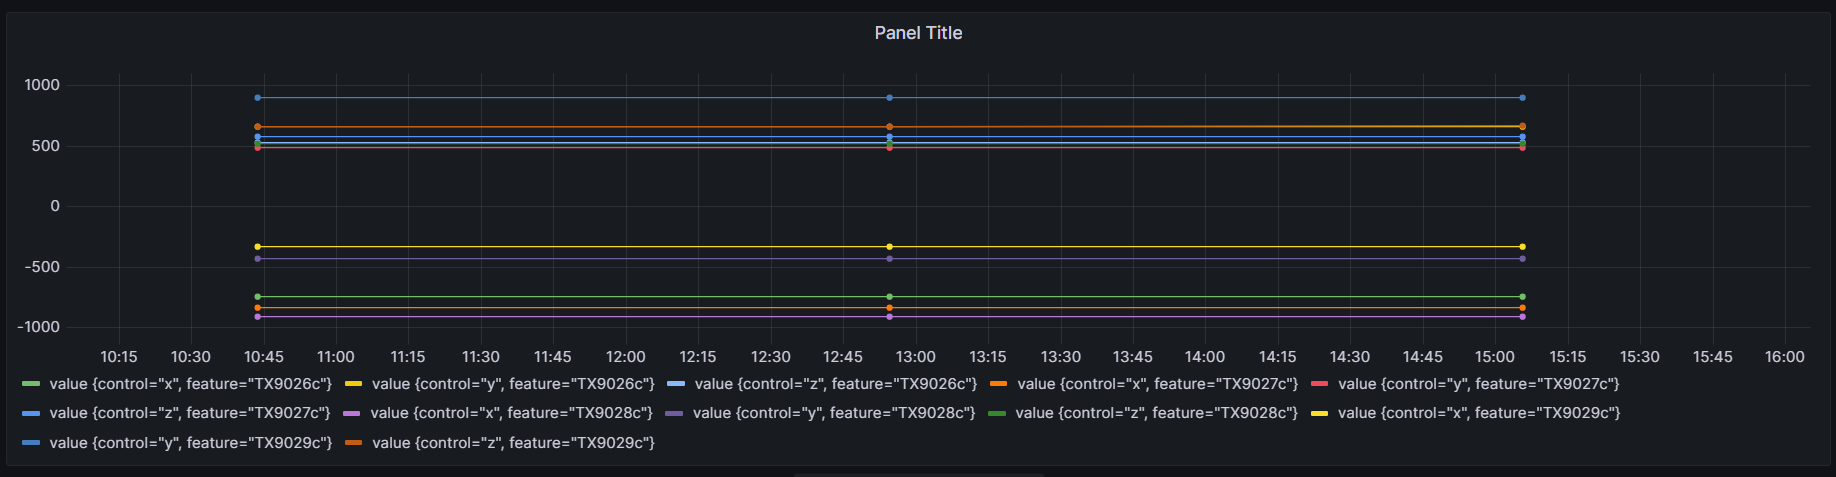 Timeseries panel with feature datasource data